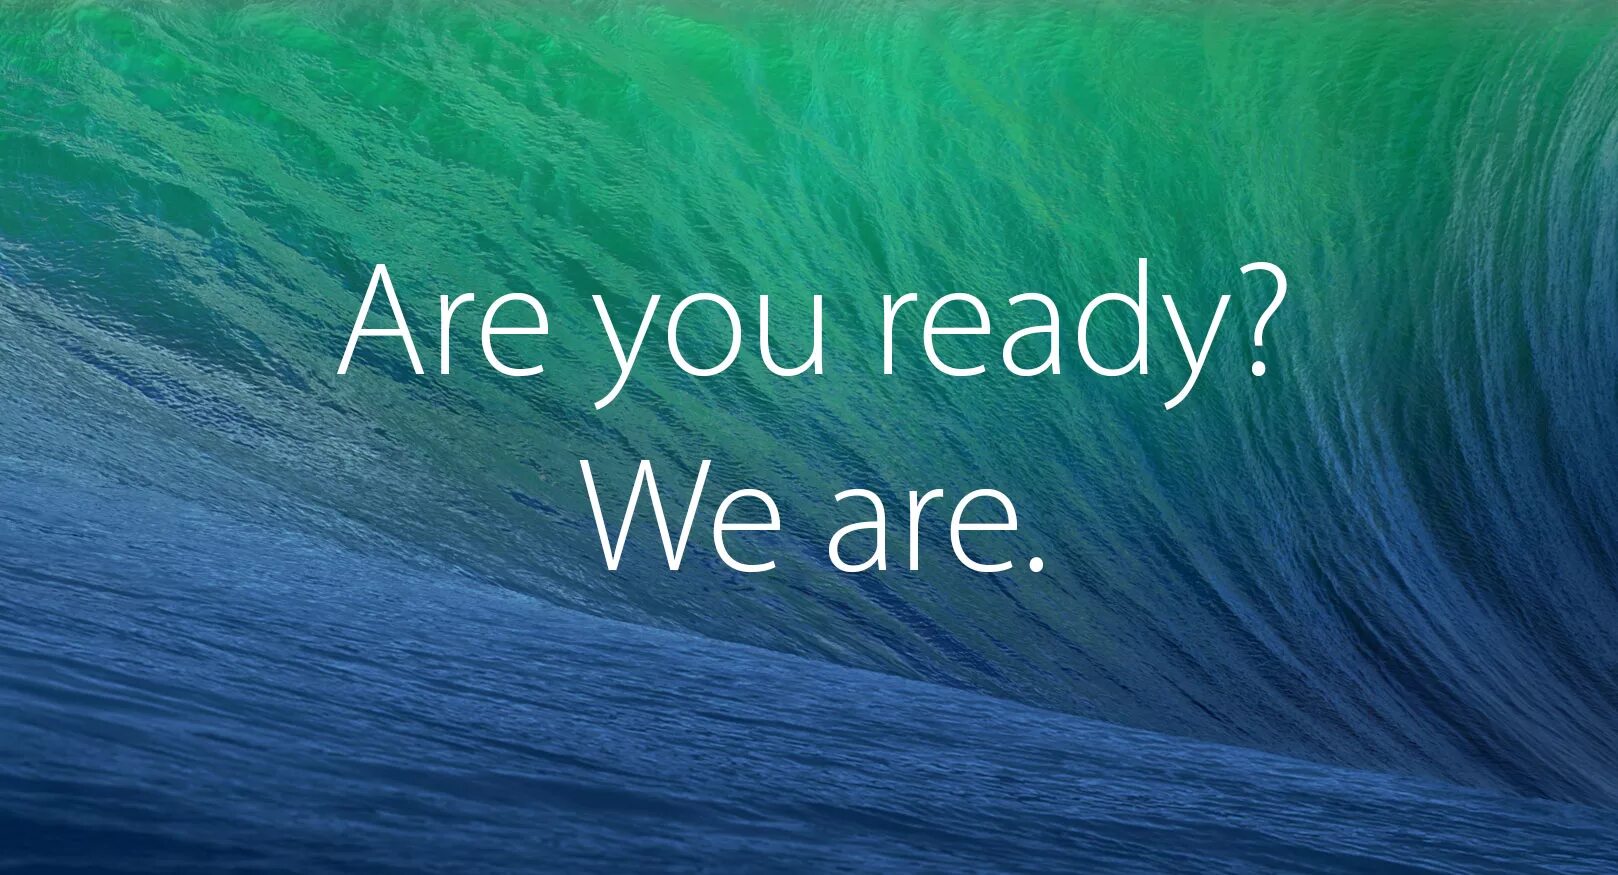 Are you ready. Os x Mavericks обои. Are you ready картинка. Are you ready ? Фото. Are you ready ordering